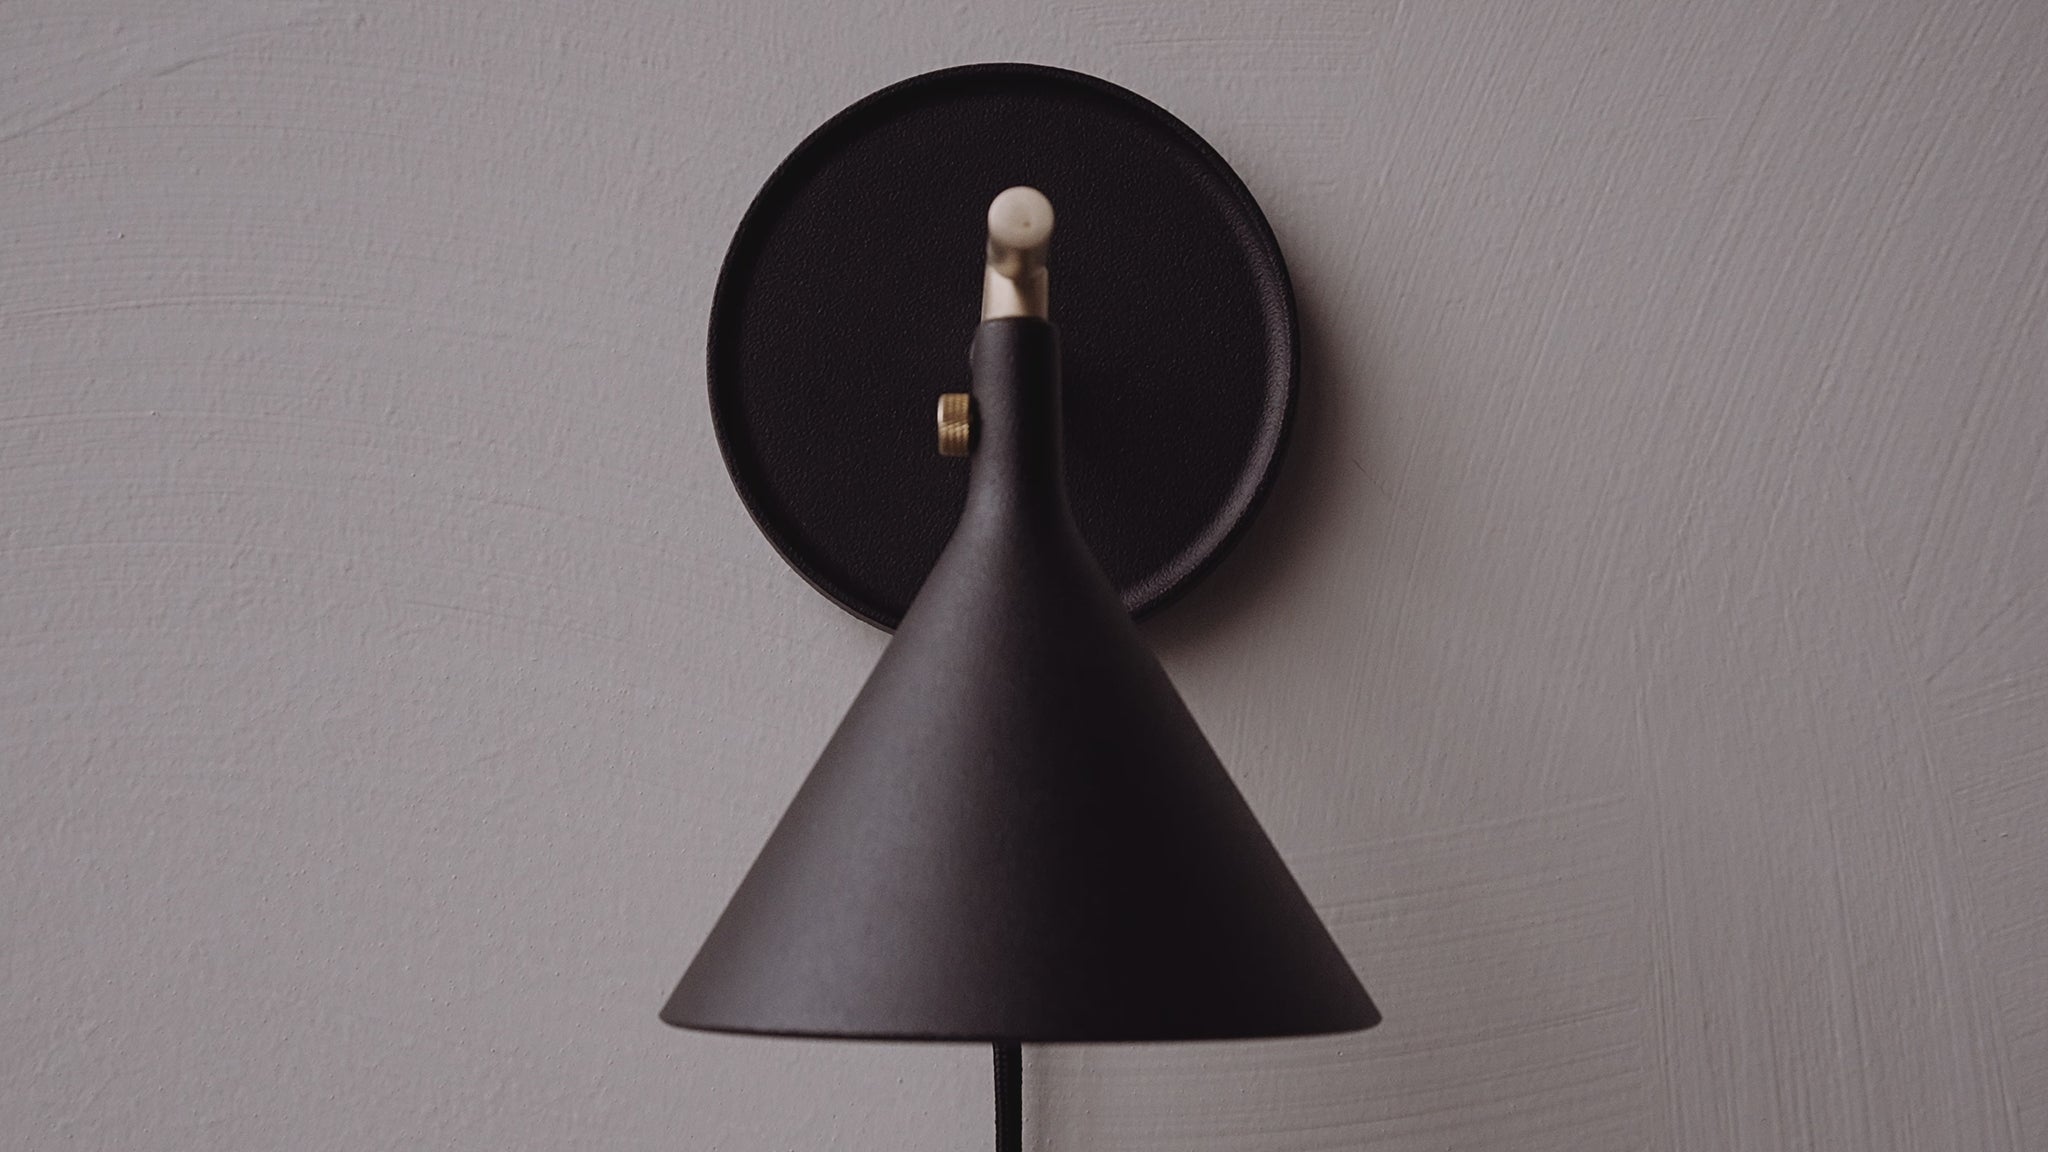 Video of the Cast Sconce Wall Lamp Diffuser, dimmer by Menu.